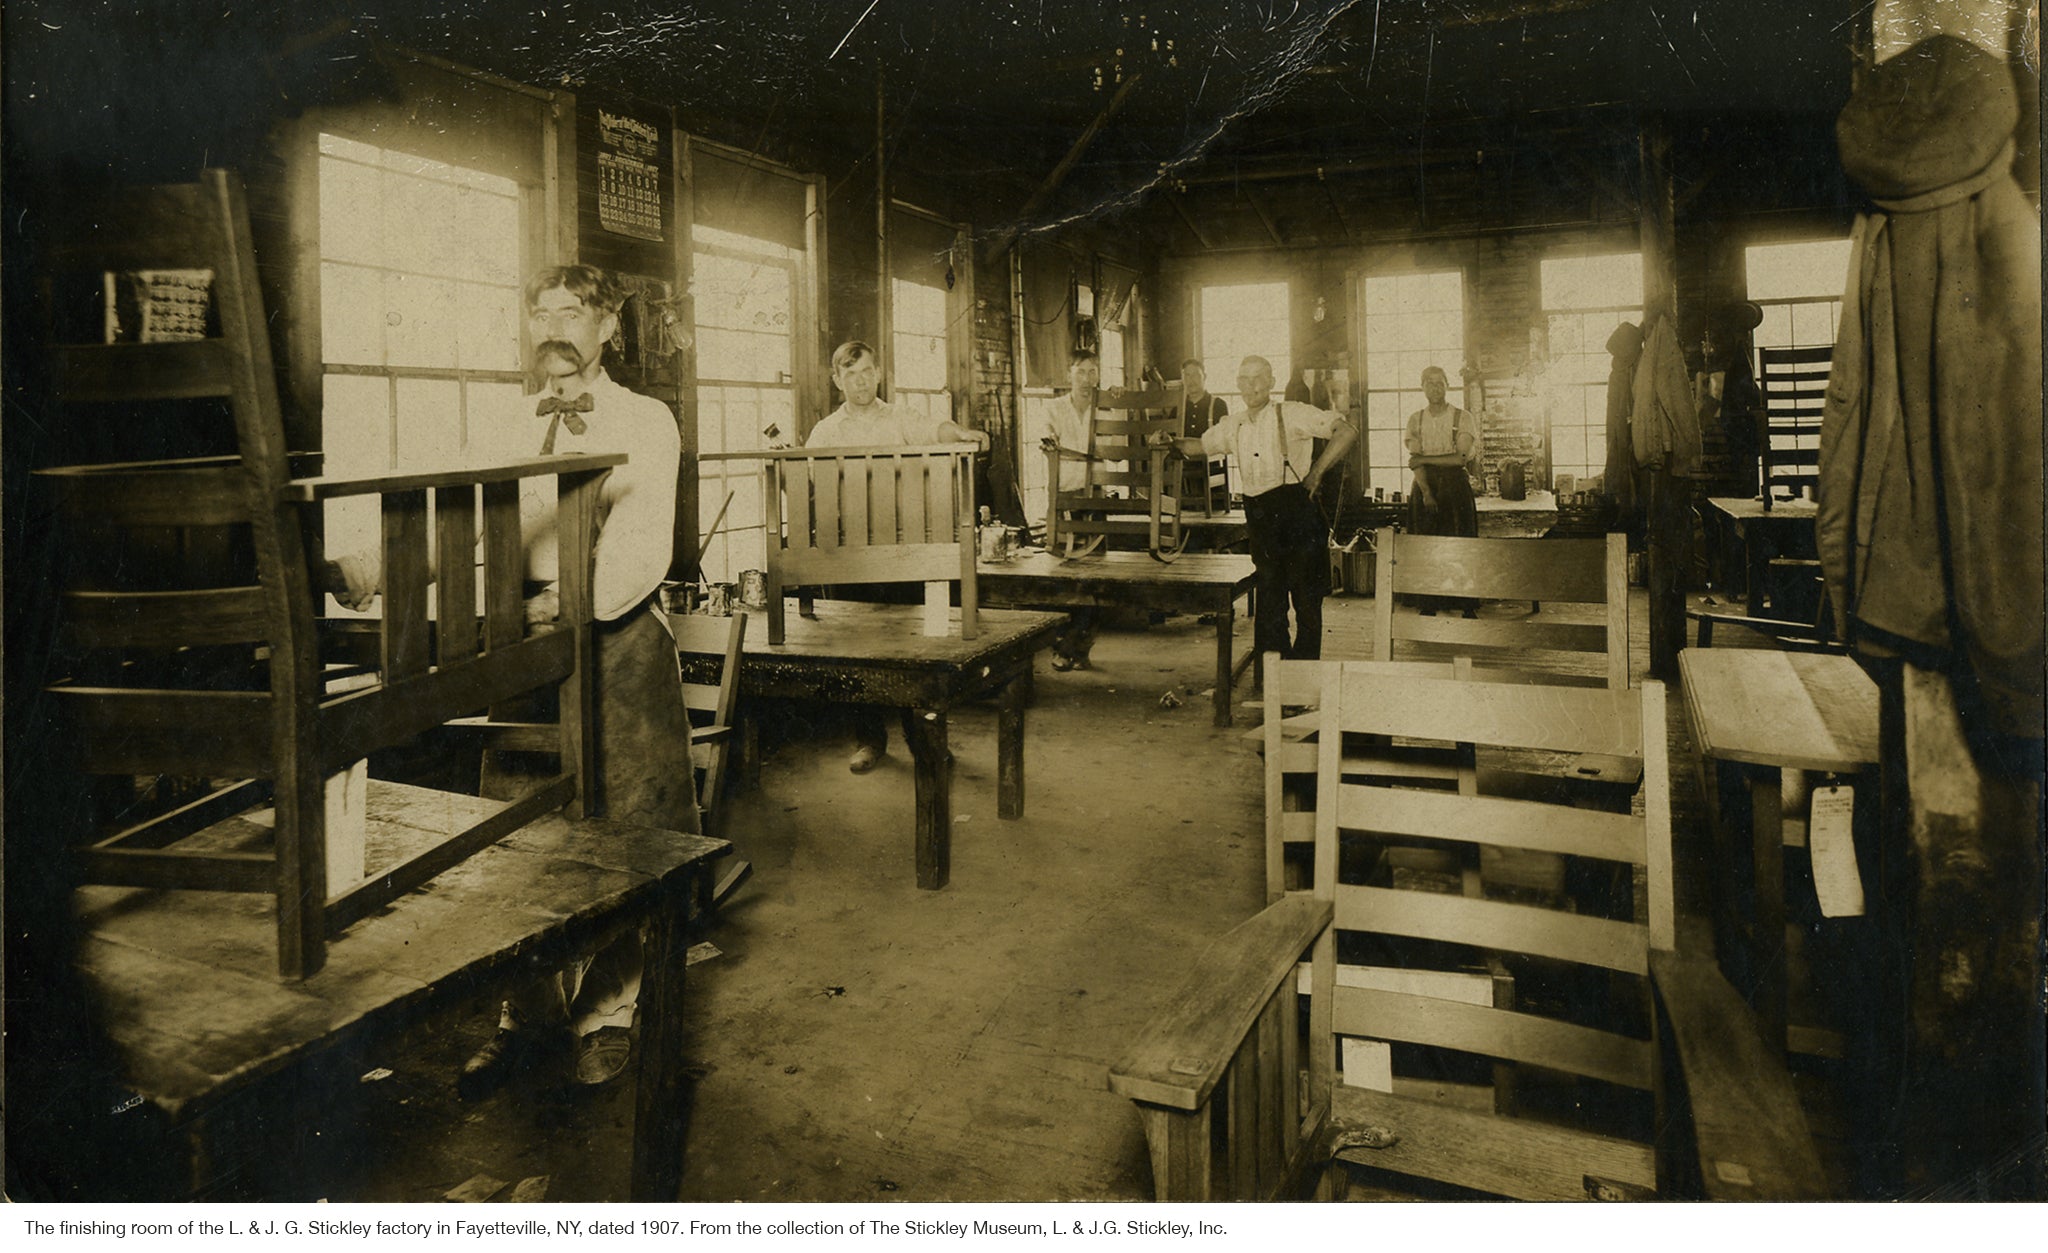 The finishing room of the L. & J. G. Stickley factory in Fayetteville, NY, dated 1907. From the collection of The Stickley Museum, L. & J.G. Stickley, Inc